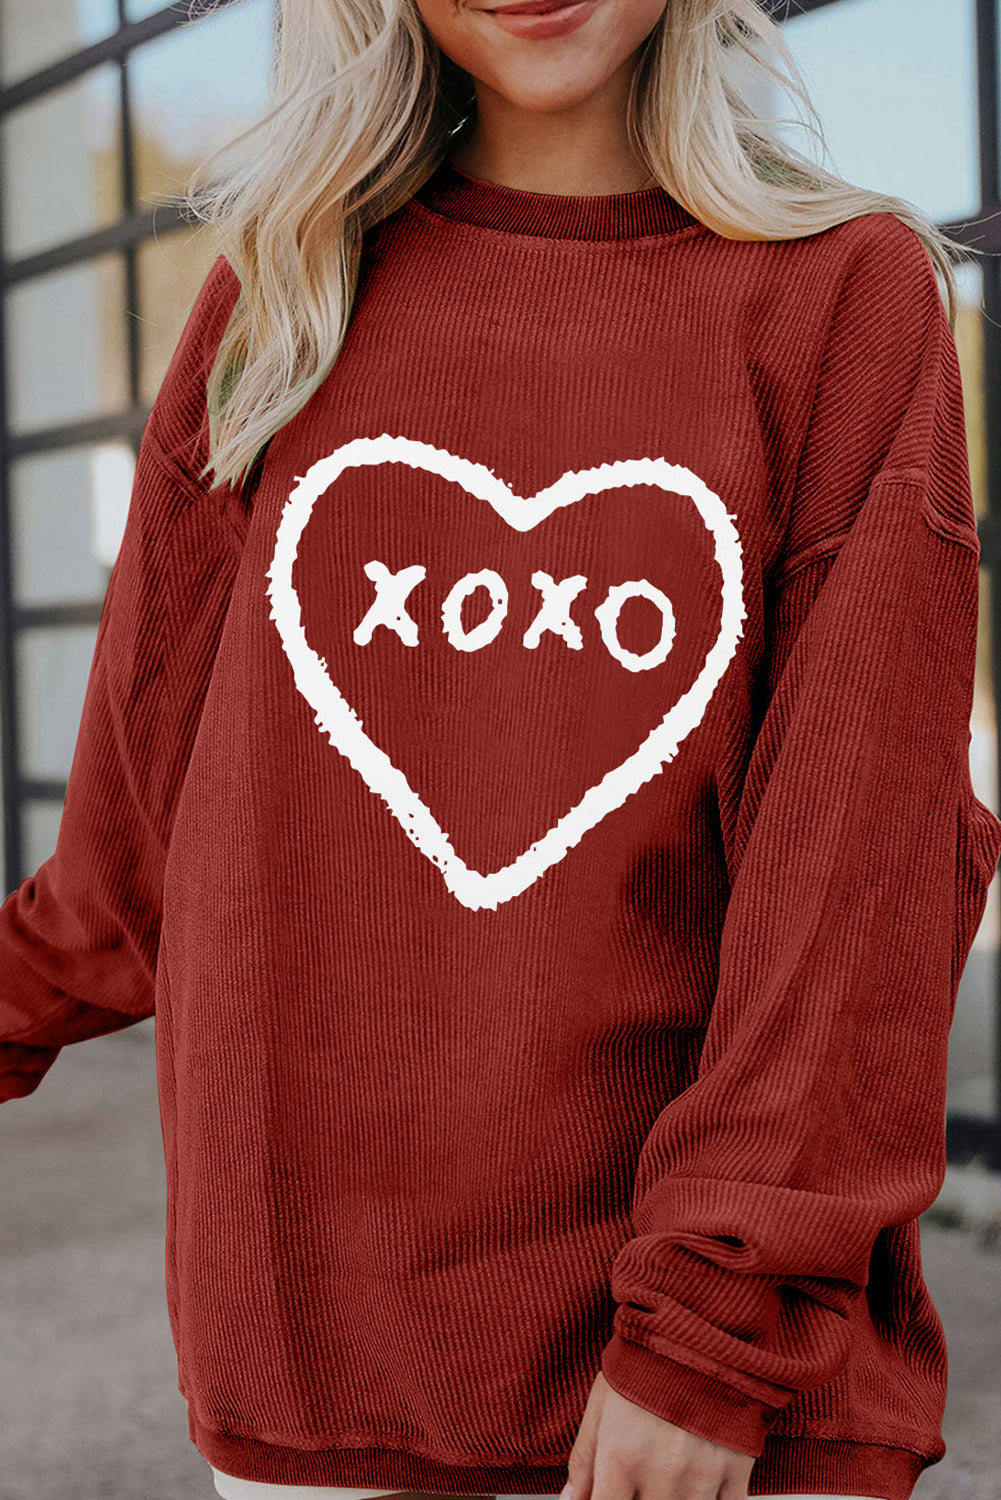 Racing Red XOXO Heart Shape Graphic Corded Sweatshirt Racing Red 100%Polyester Graphic Sweatshirts JT's Designer Fashion